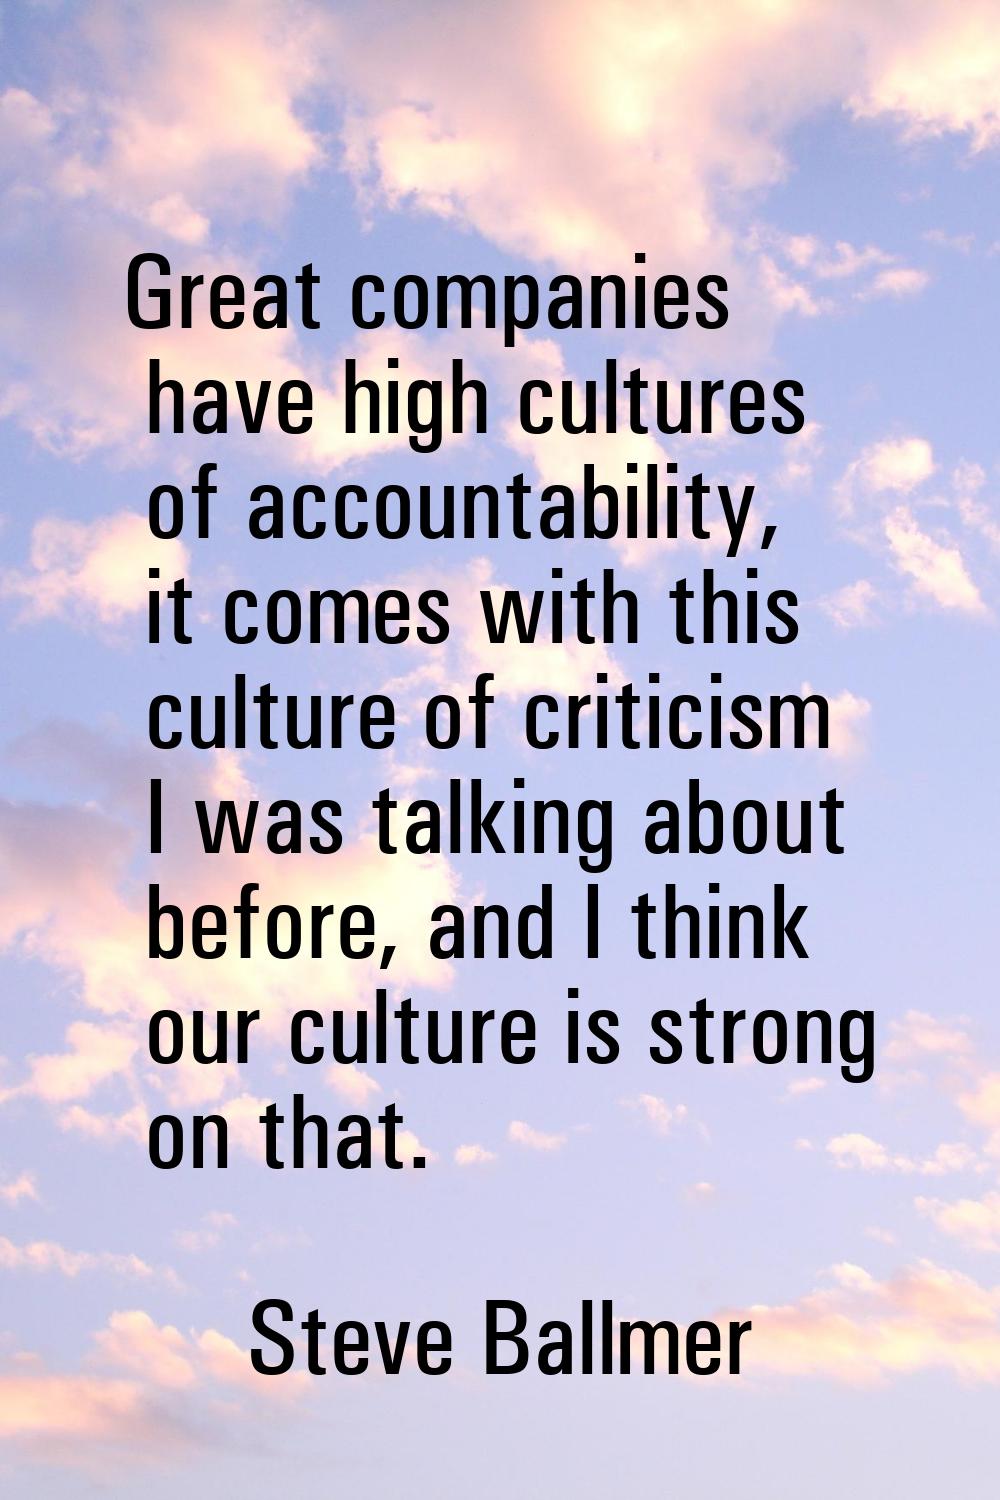 Great companies have high cultures of accountability, it comes with this culture of criticism I was